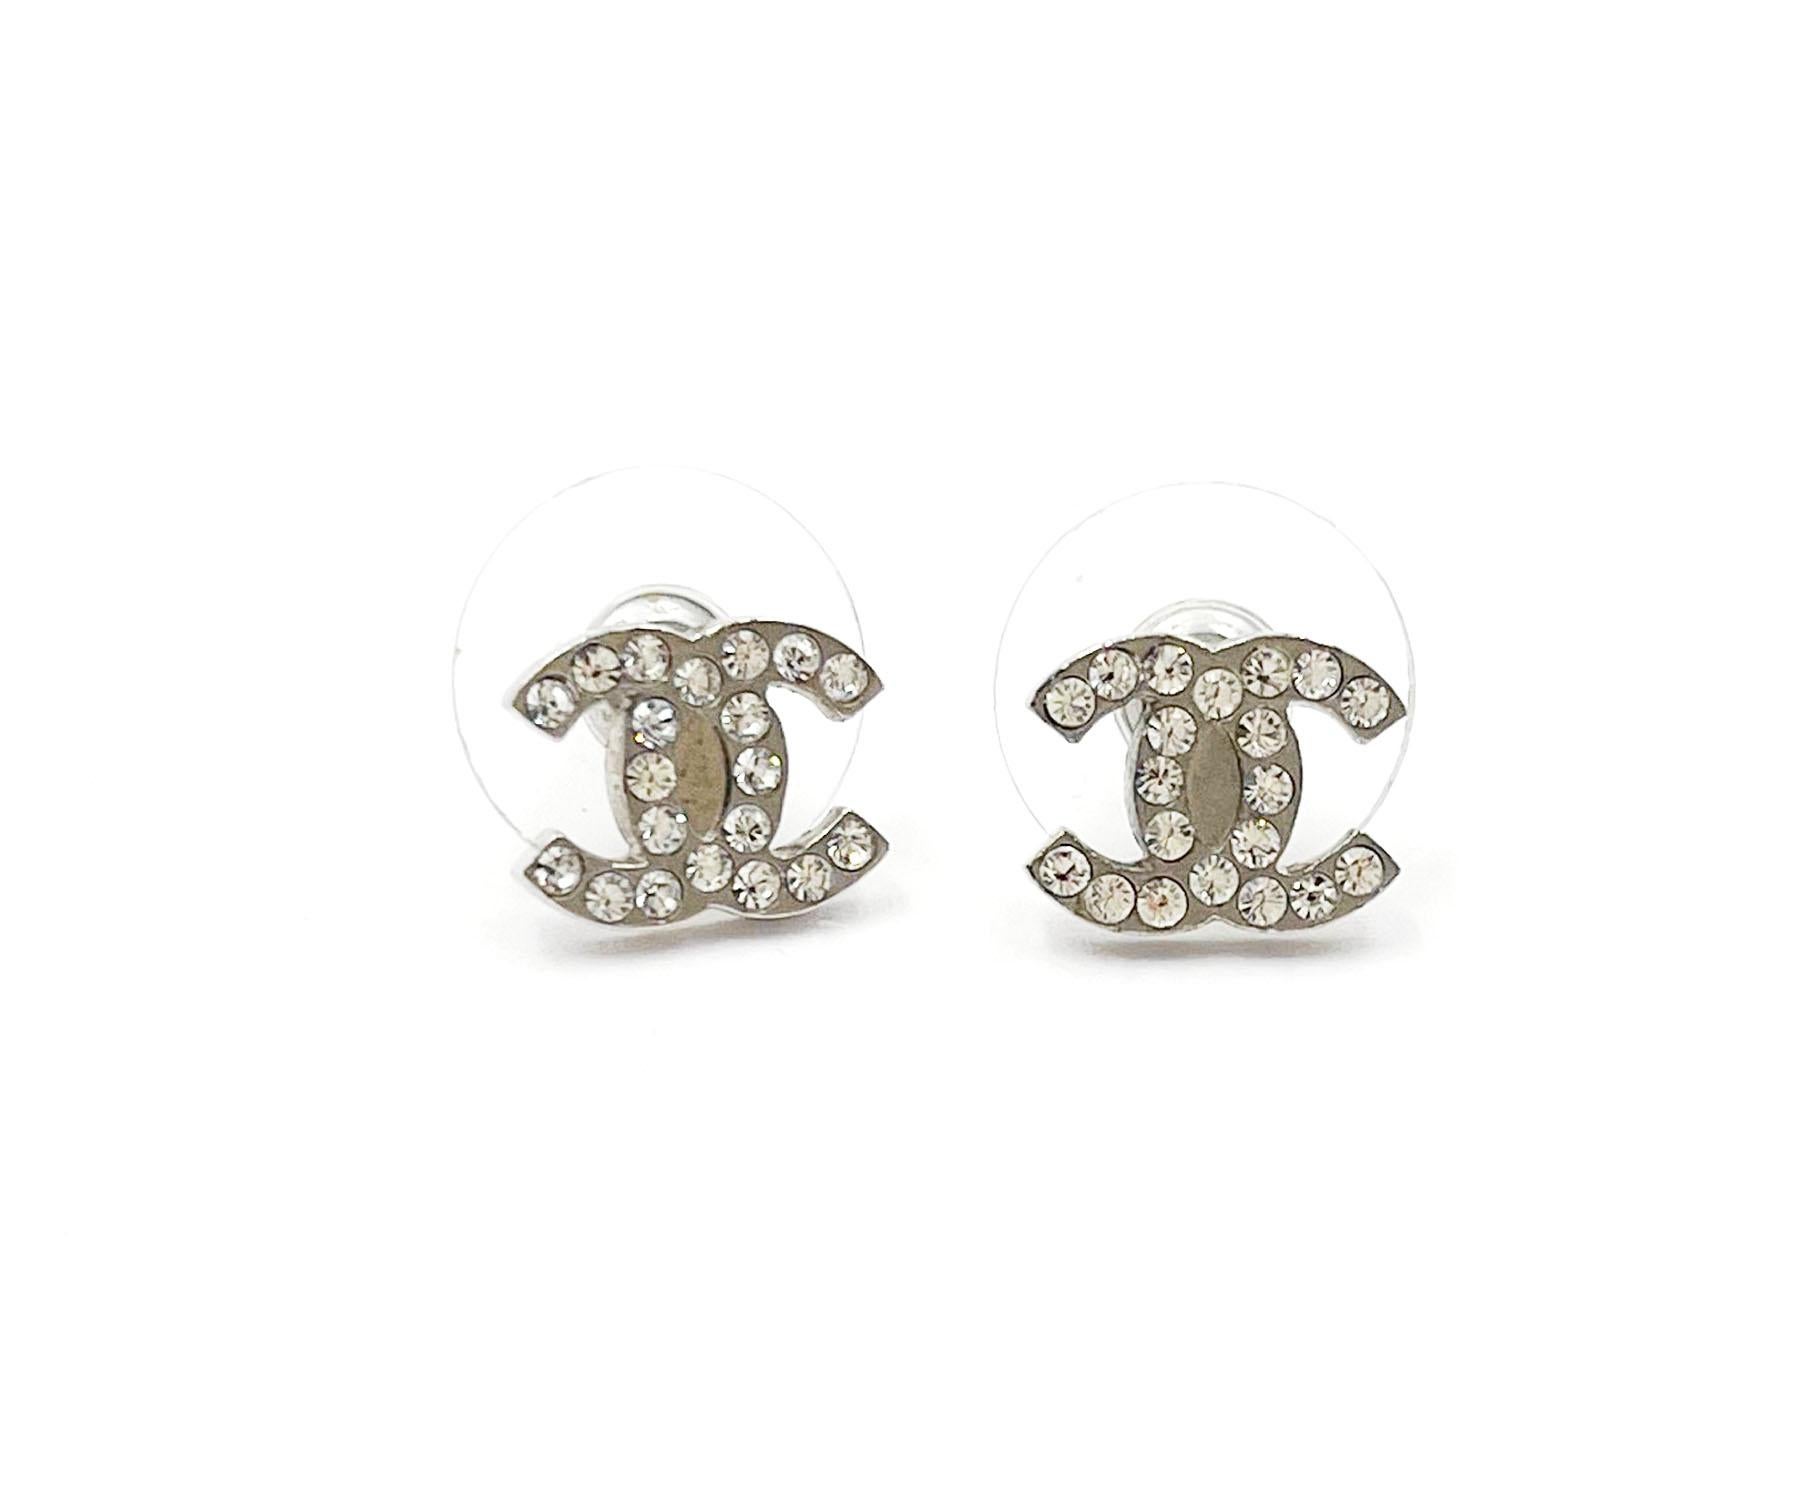 Chanel Classic Silver CC Crystal Solid Small Piercing Earrings

*Marked 04
*Made in France

-Approximately 0.3